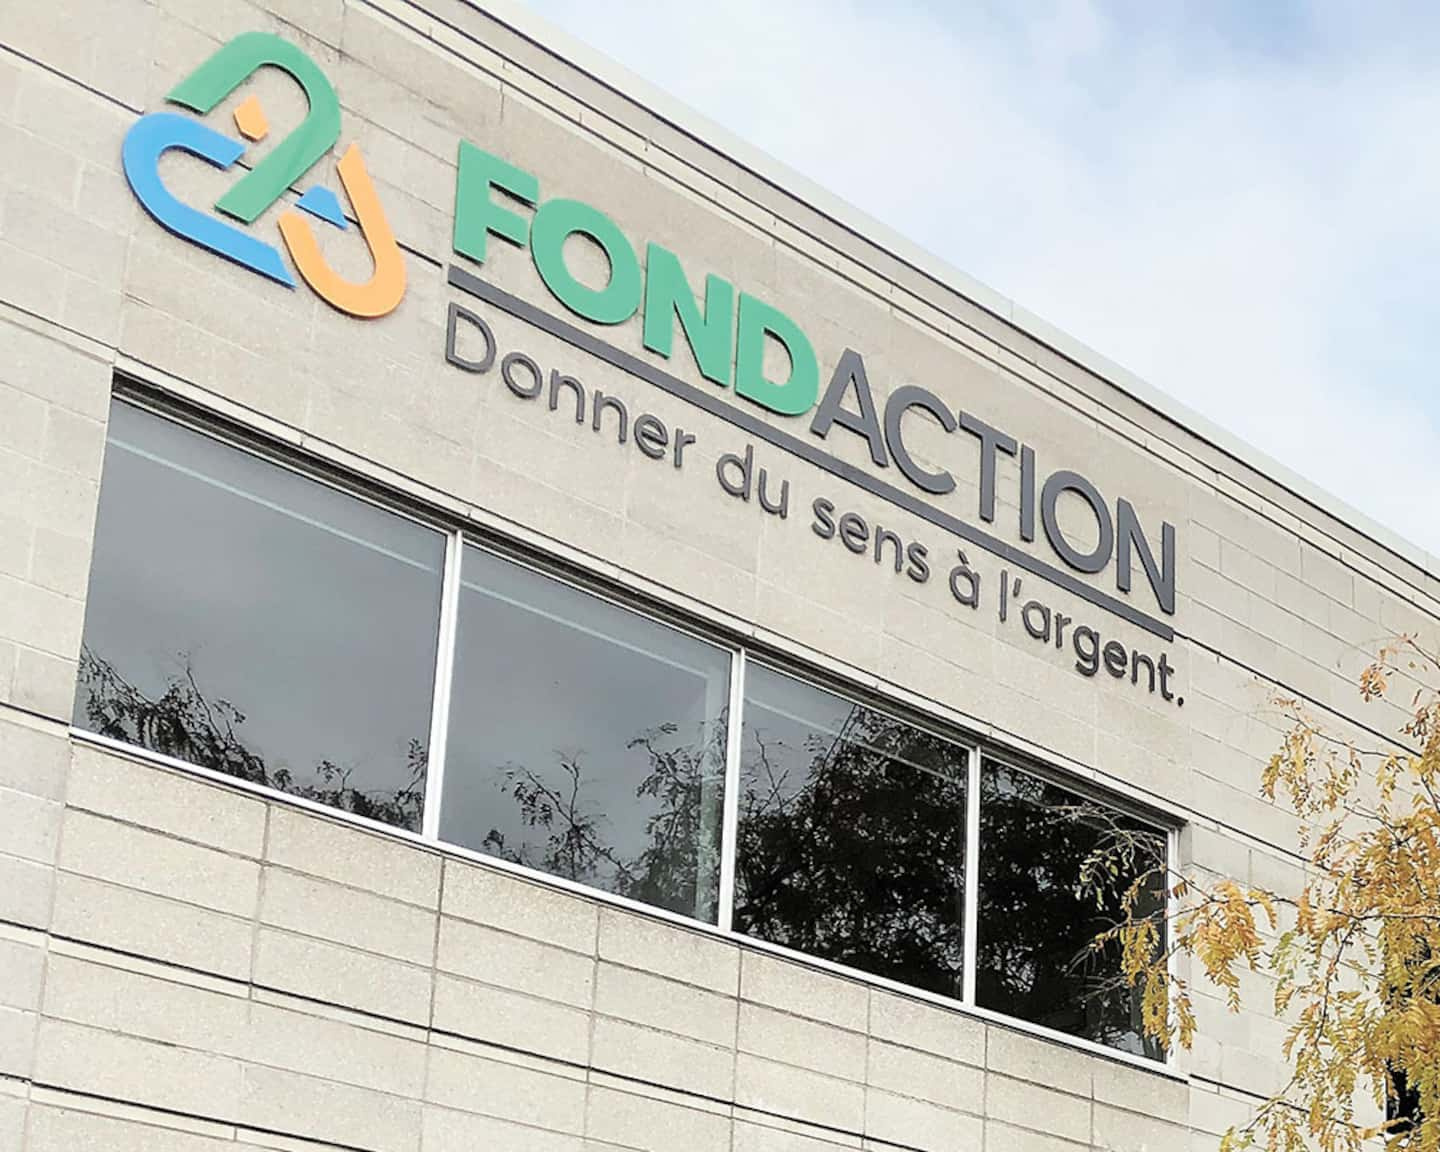 Fondaction: let's set the record straight